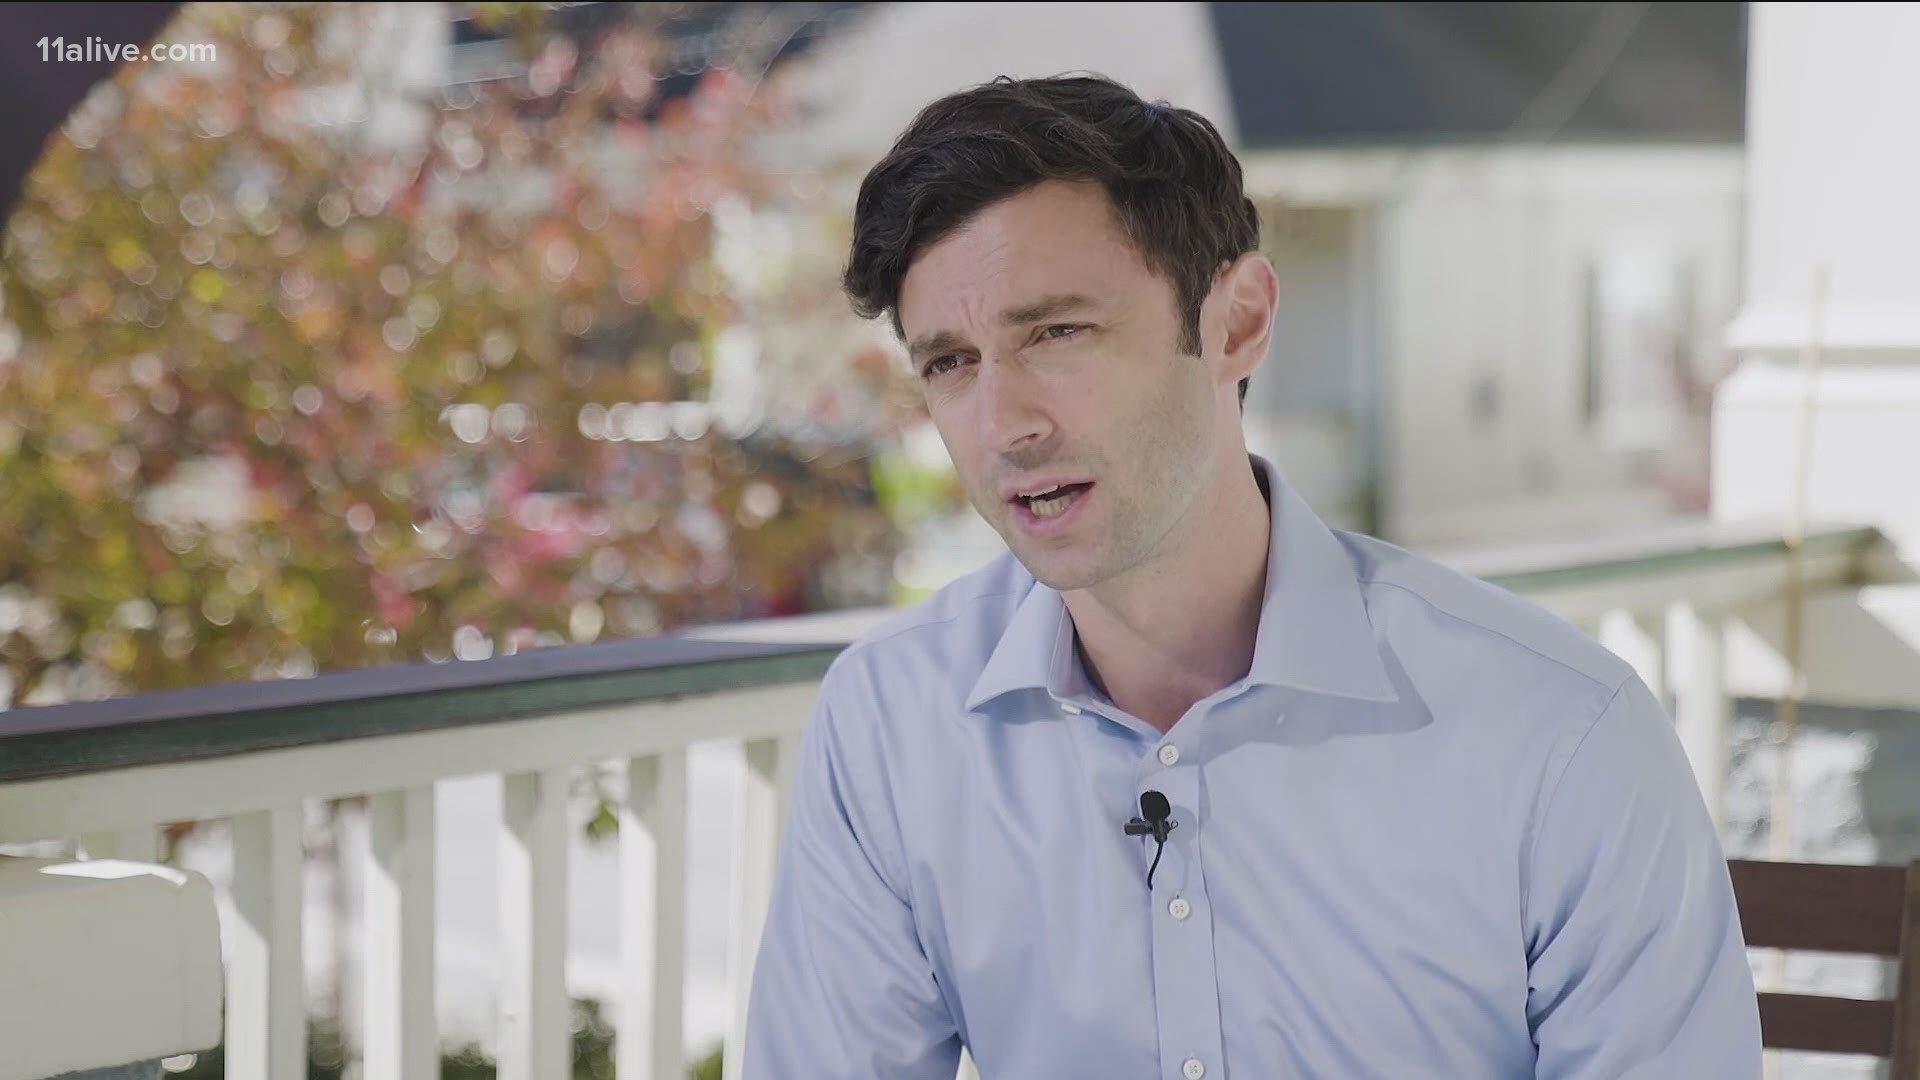 11Alive's Verify team is digging into claims against all four Senate runoff candidates. Here's what we found when fact checking claims against Jon Ossoff.